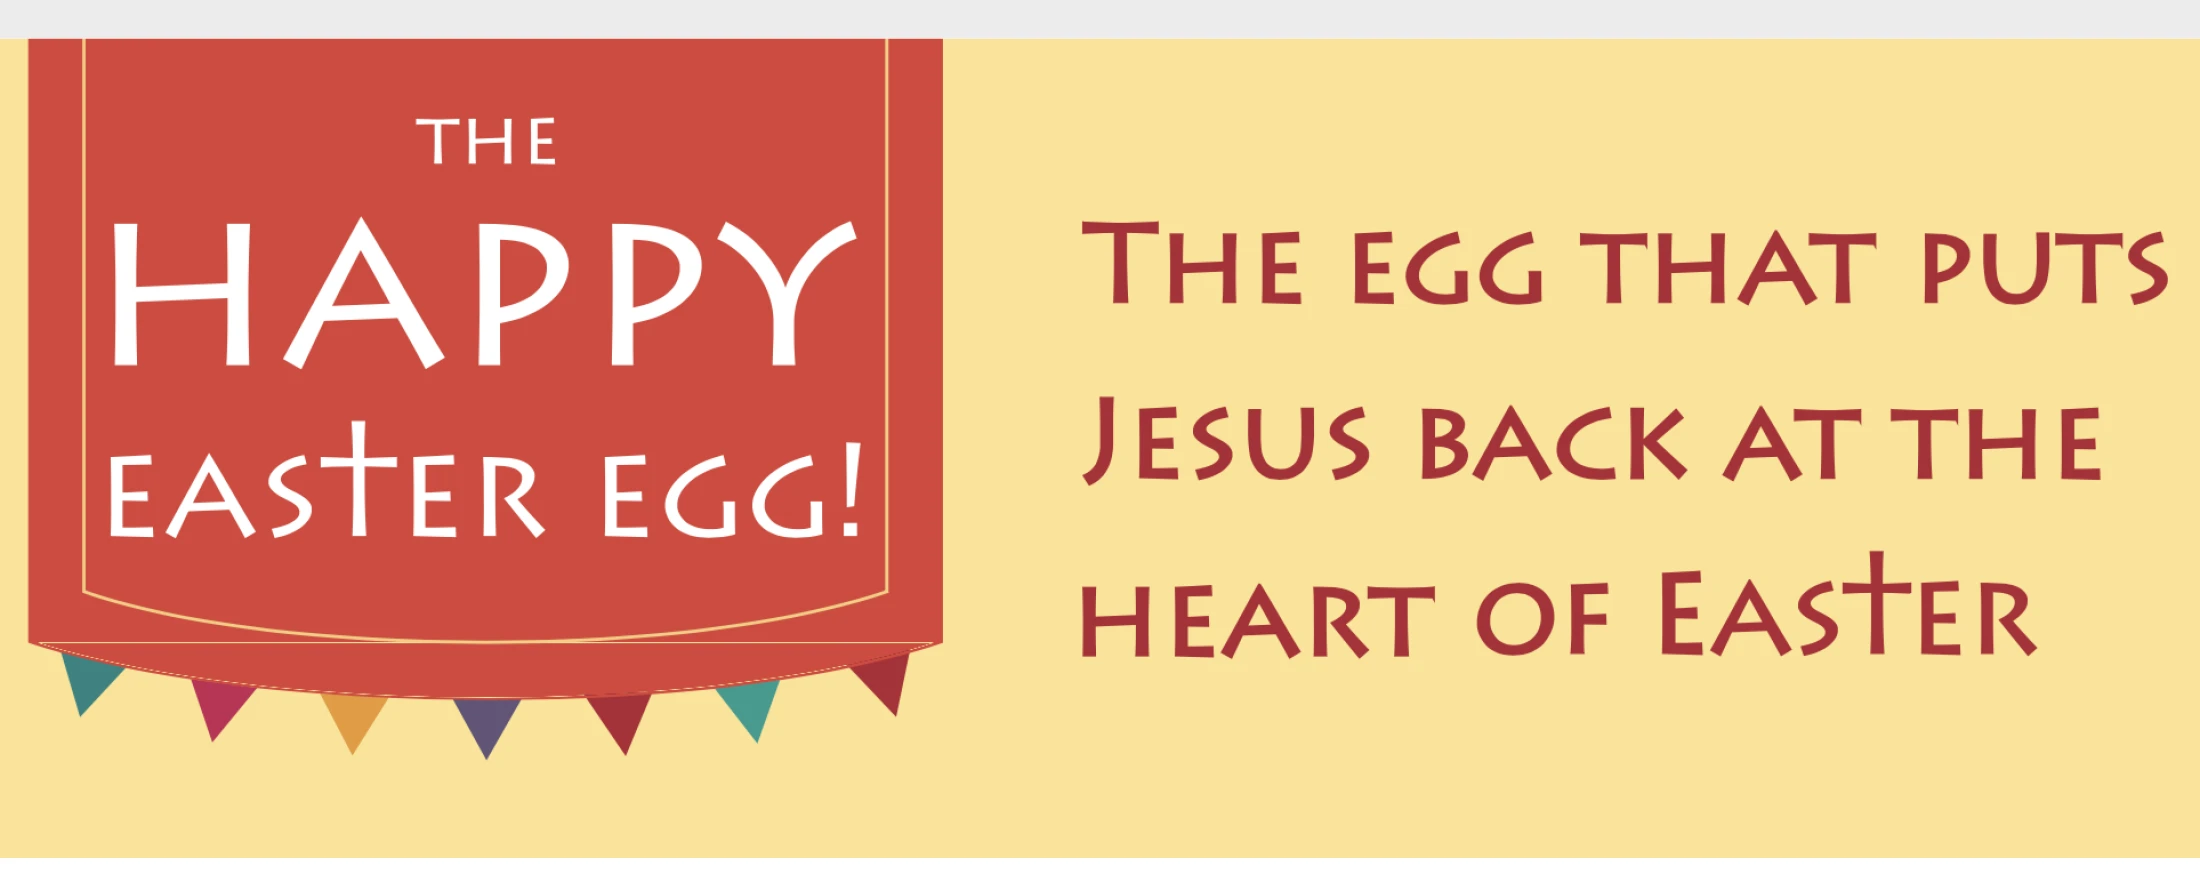 Share Easter with the Happy Egg and Card